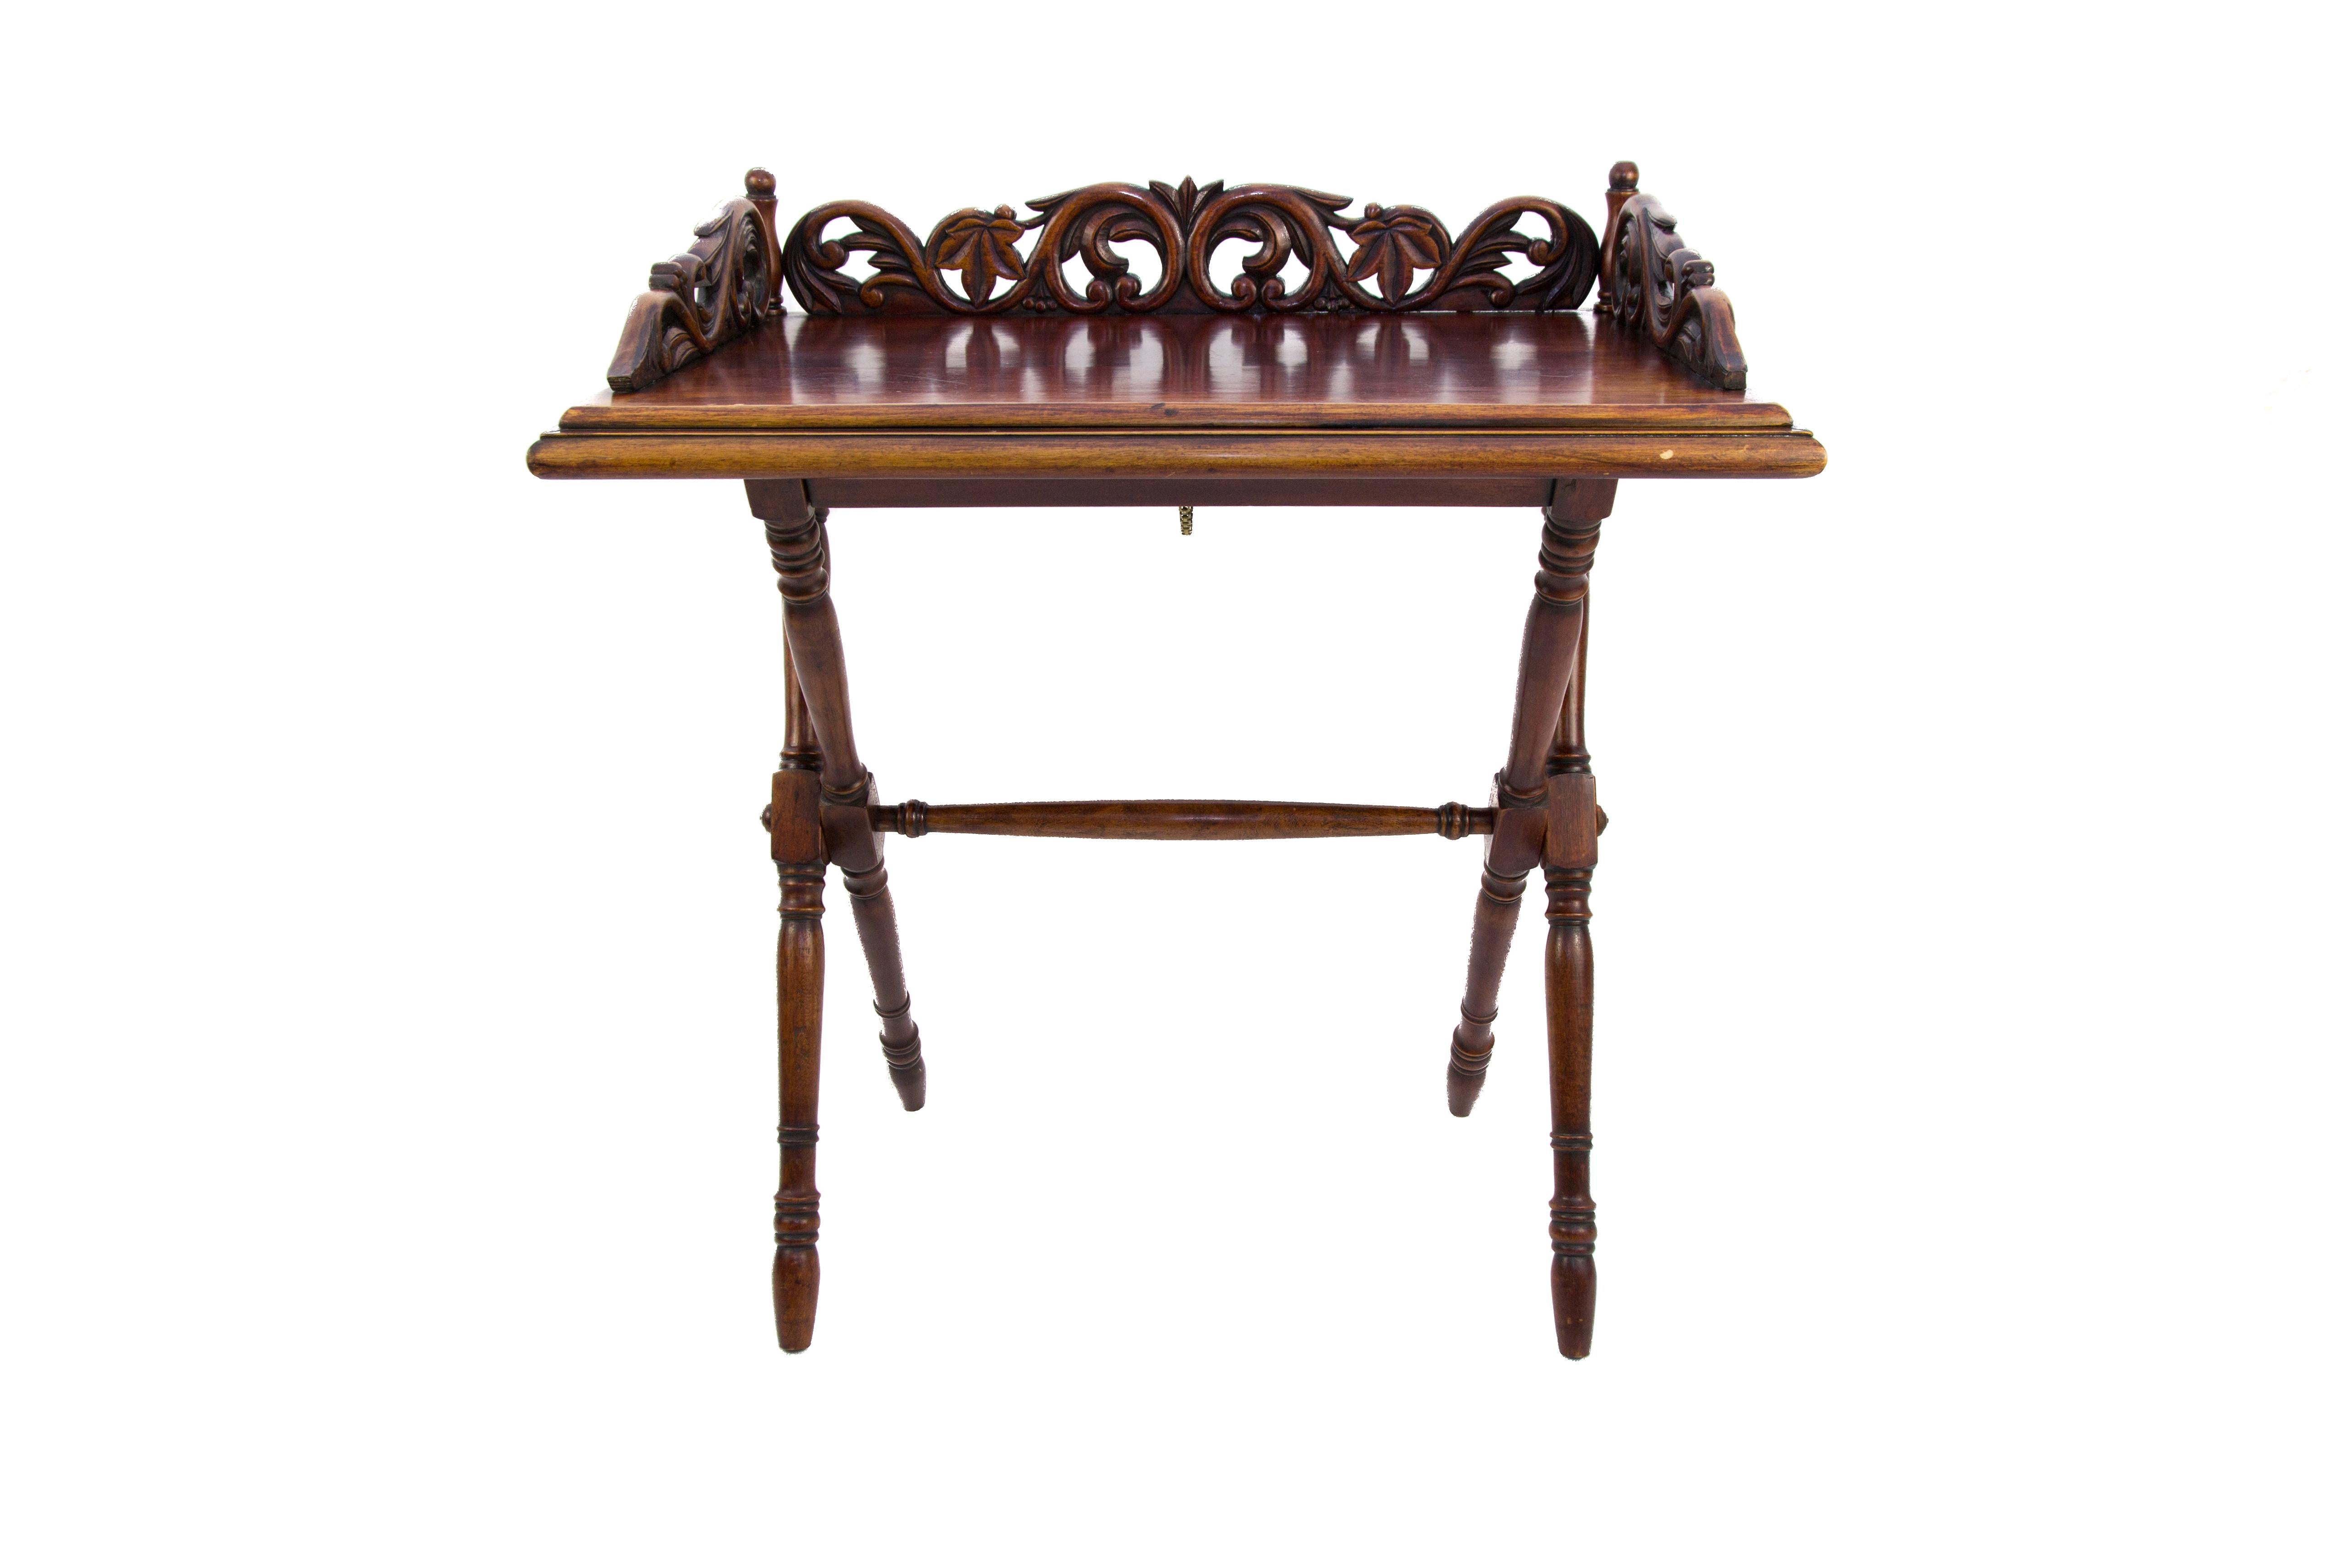 An ornate and elegant Victorian-style folding table with carvings, made of walnut, France, circa the 1920s.
In good antique condition, with slight age-related signs of wear.
Dimensions: height 74 cm / 29.1 in; width 67 cm / 26.3 in; depth 43 cm / 17